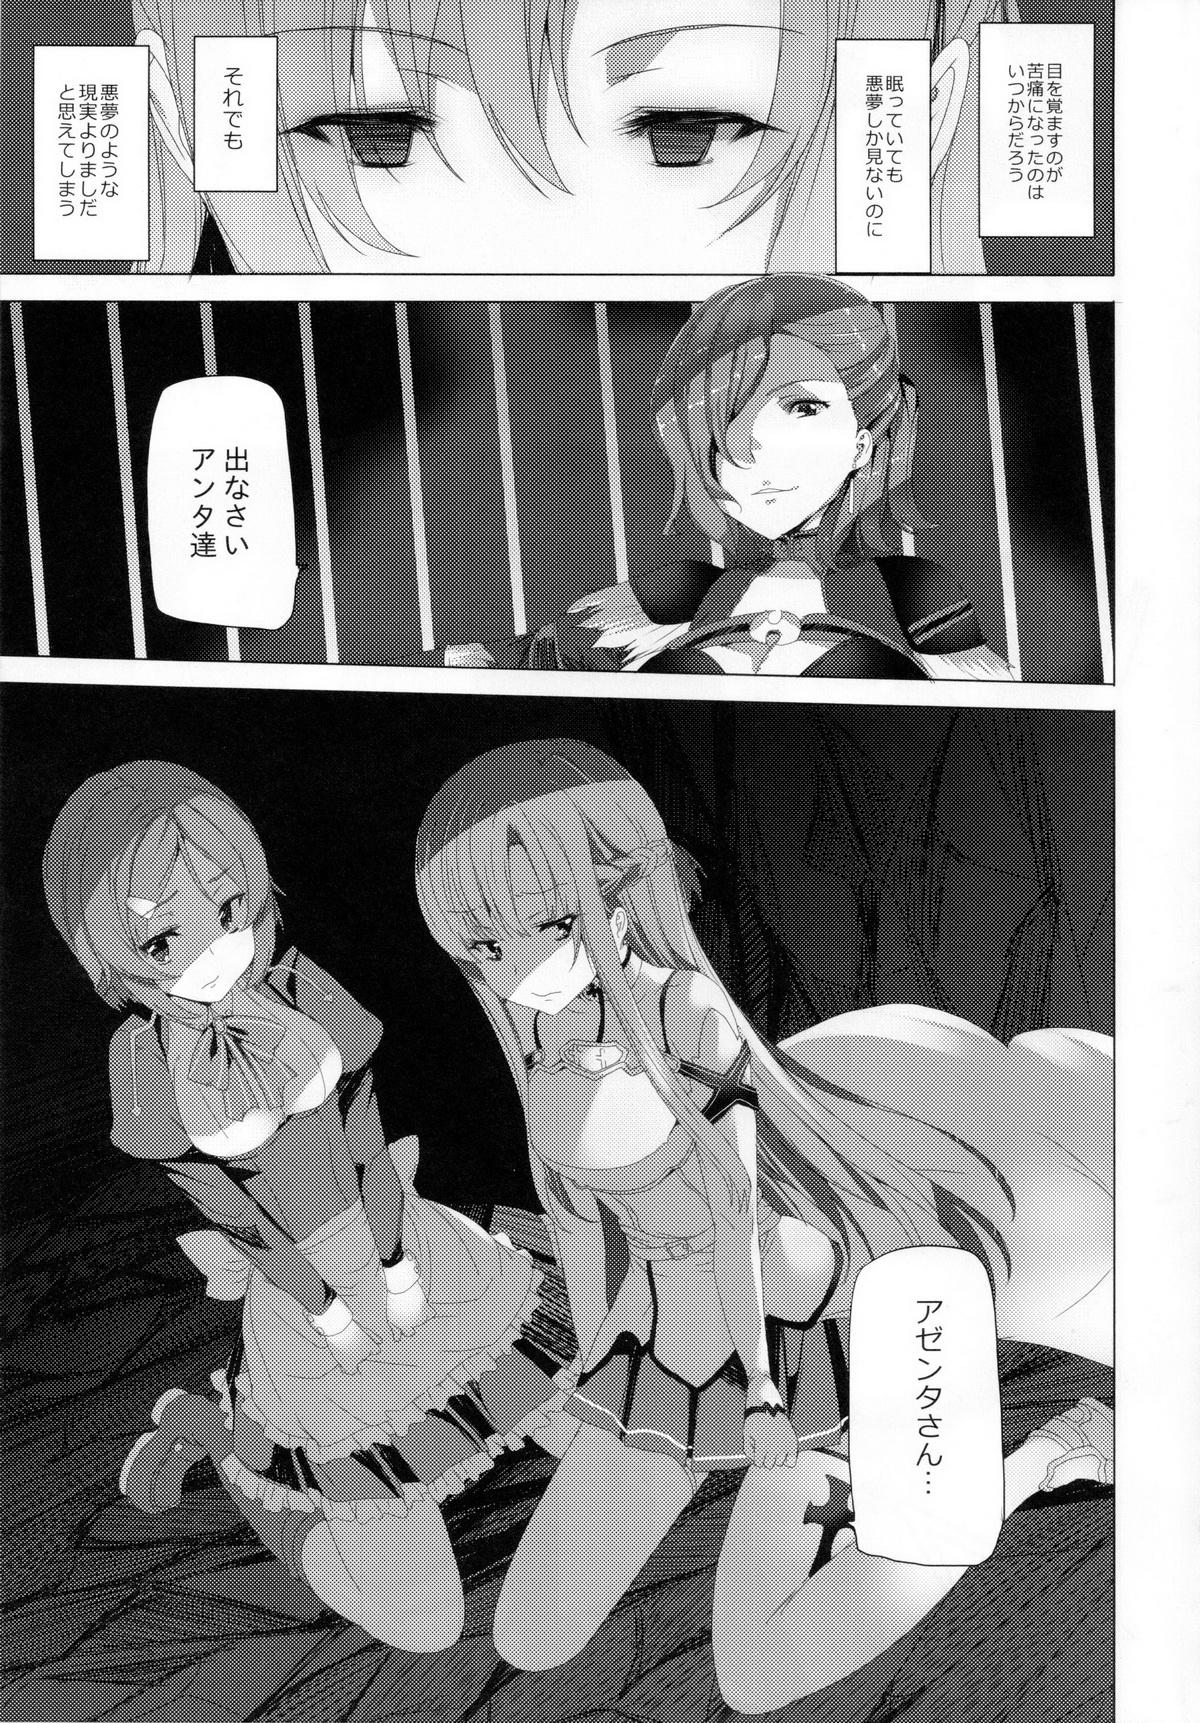 Sexy Whores WRONG WORLD - Sword art online Hot Girls Fucking - Page 7